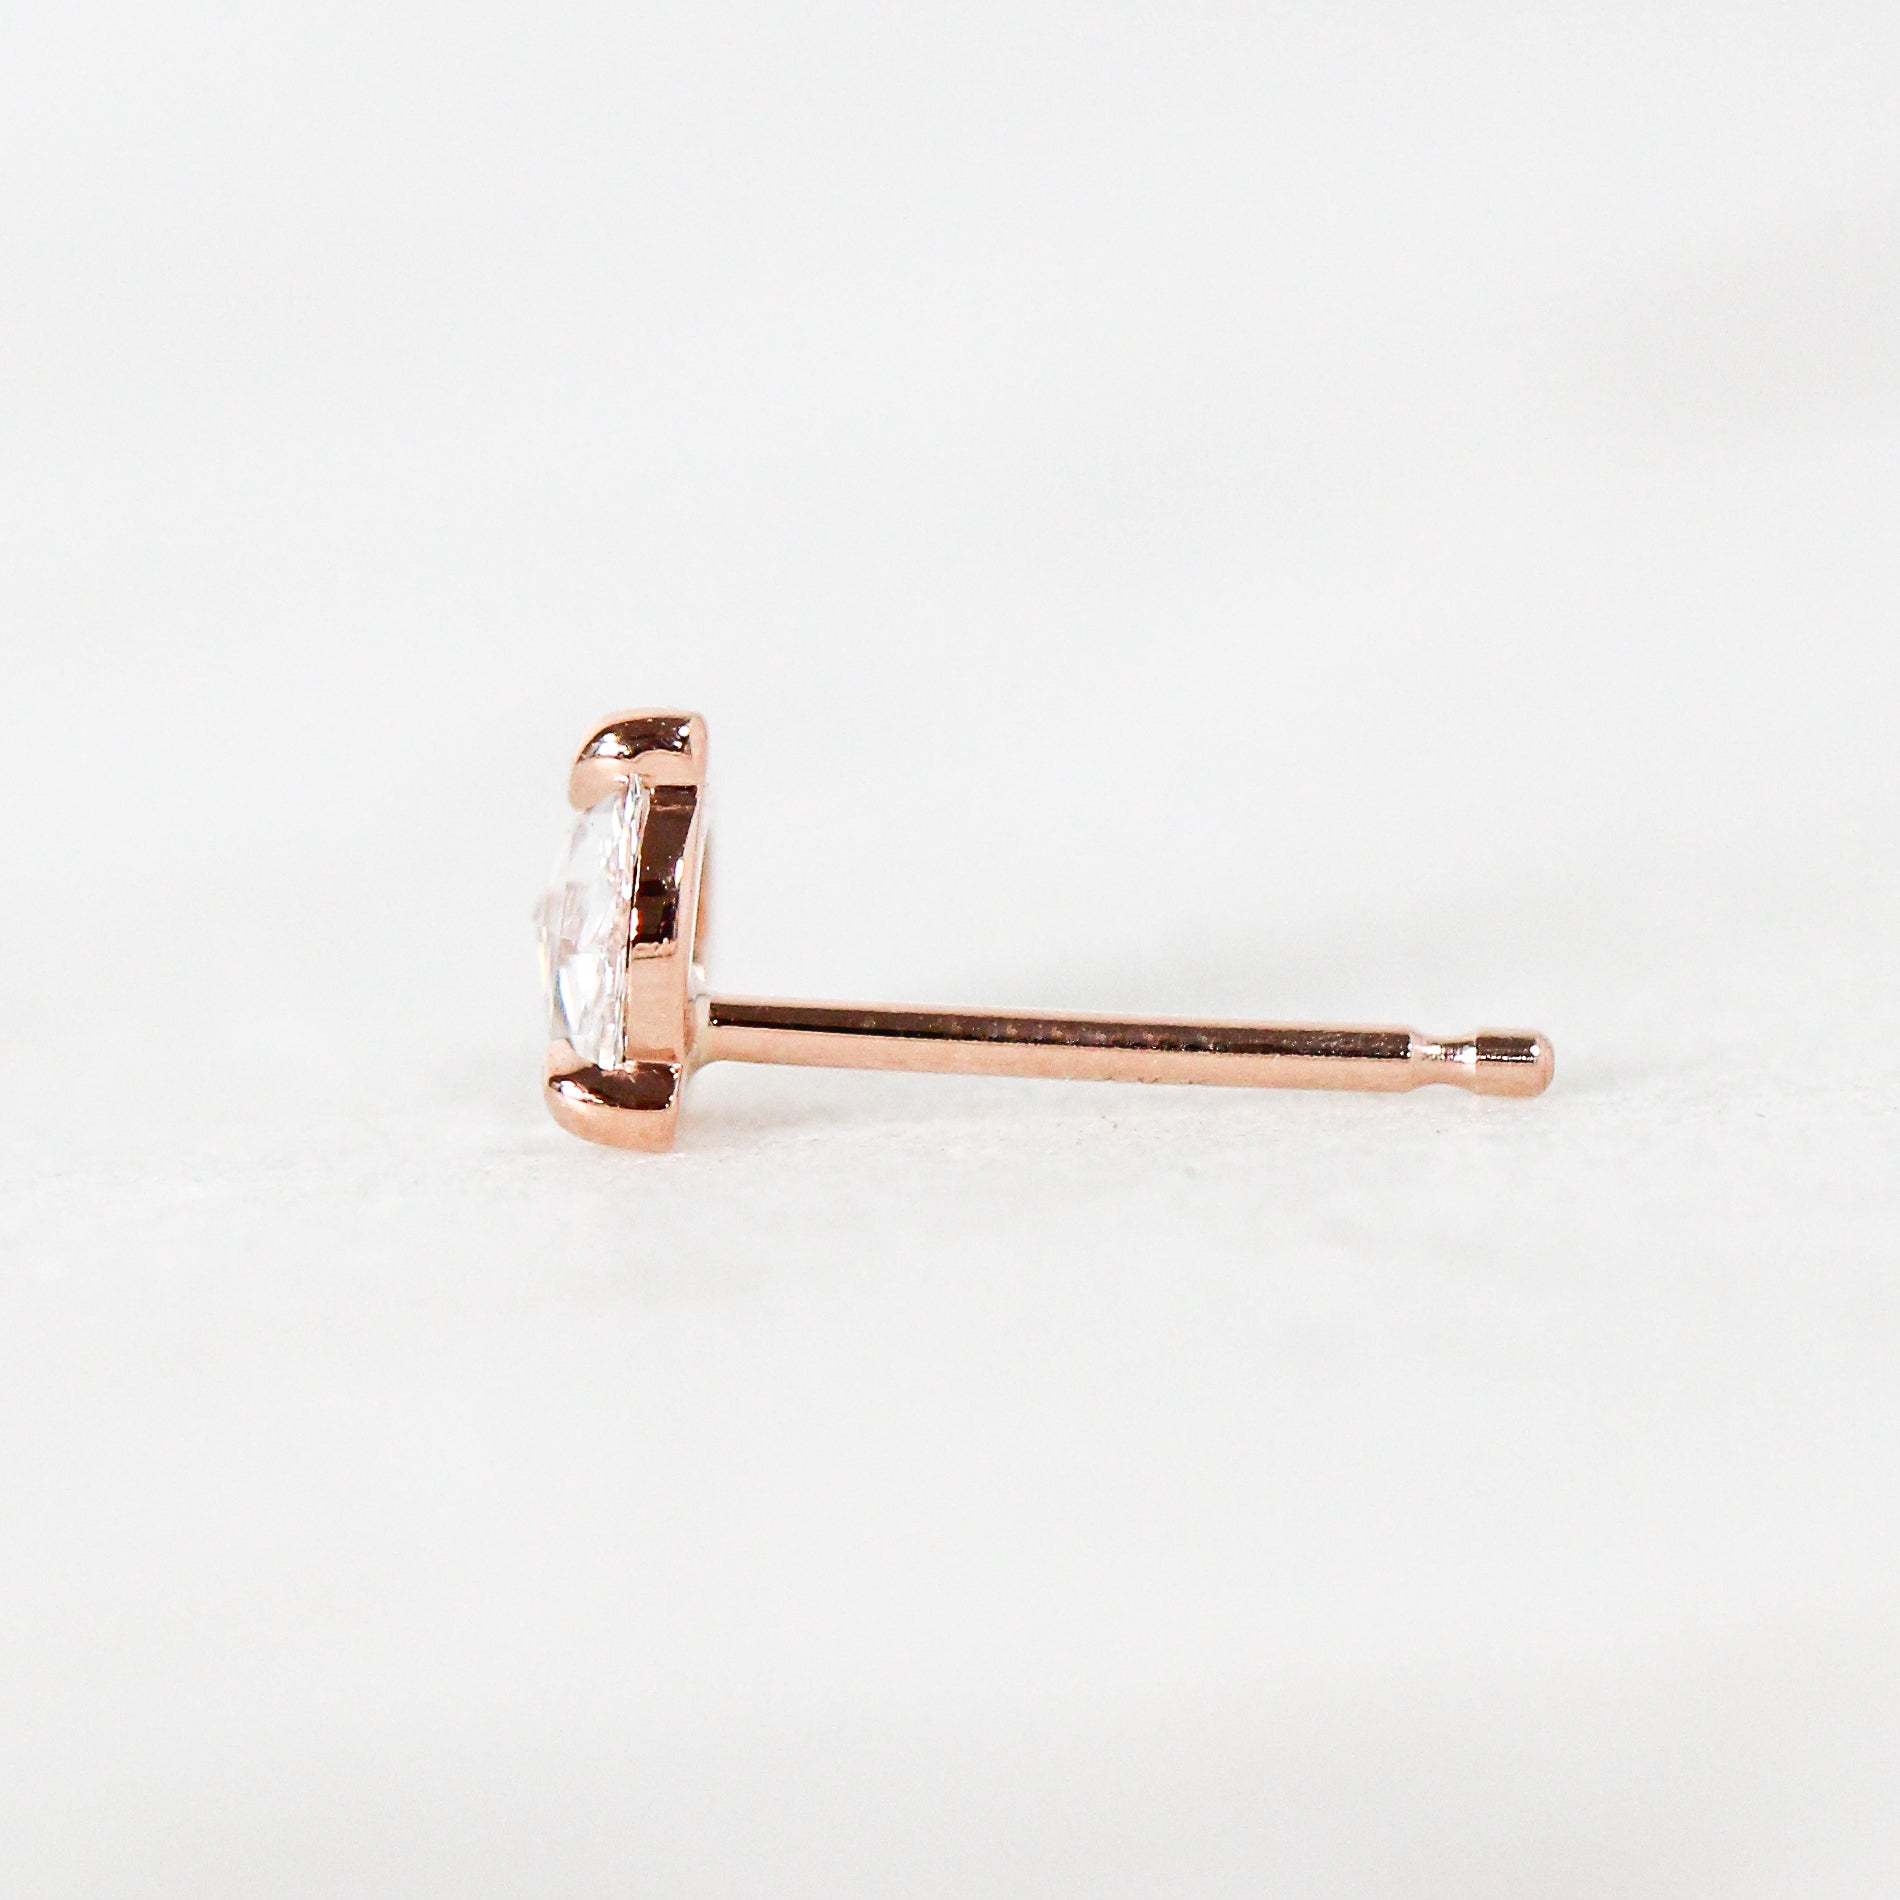 0.25 ct. Rose Cut Diamond Earring Studs  in 14K Rose or Yellow Gold - Ready to Ship - Midwinter Co. Alternative Bridal Rings and Modern Fine Jewelry